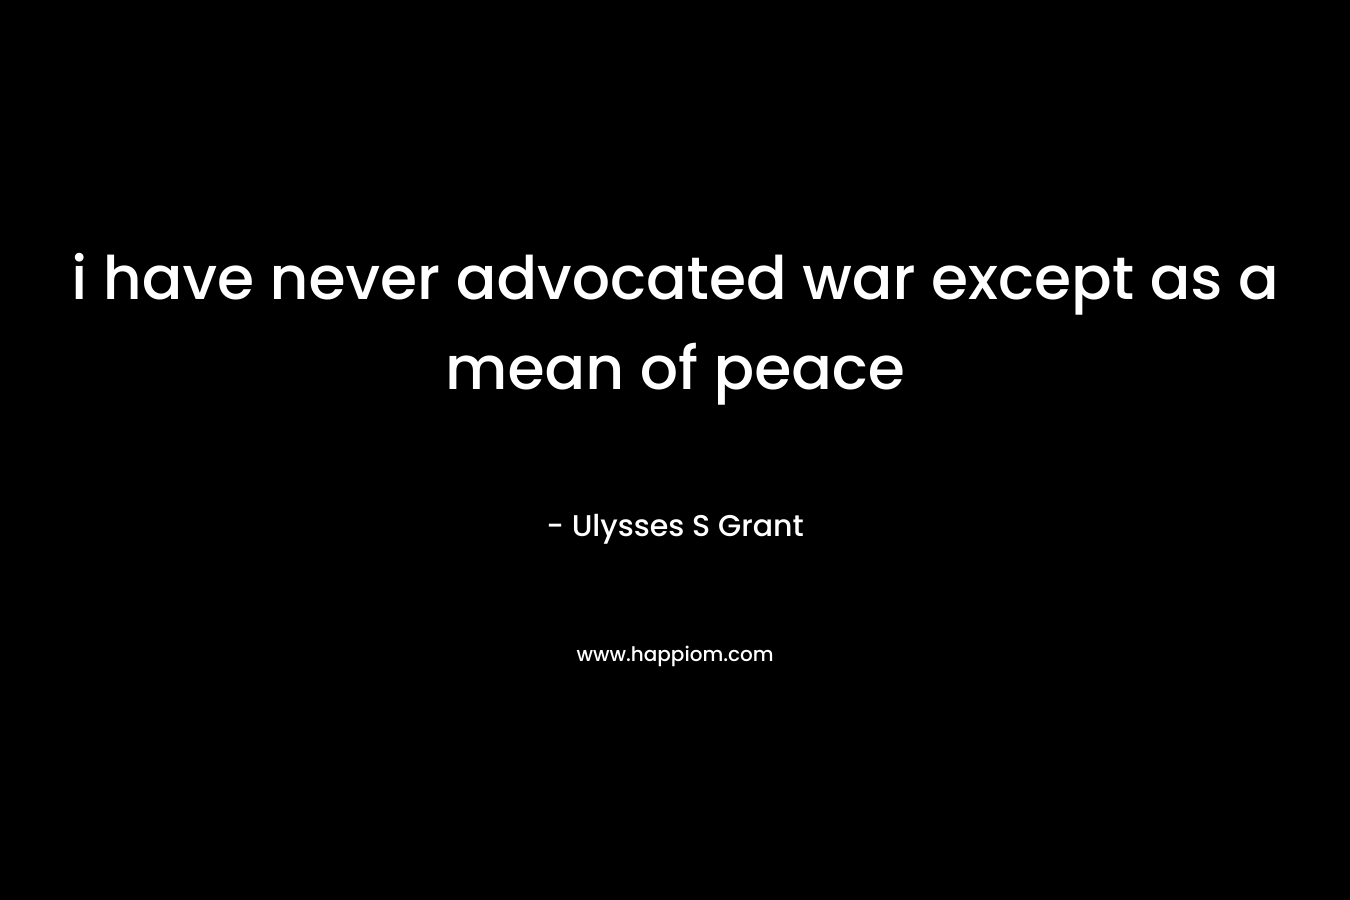 i have never advocated war except as a mean of peace